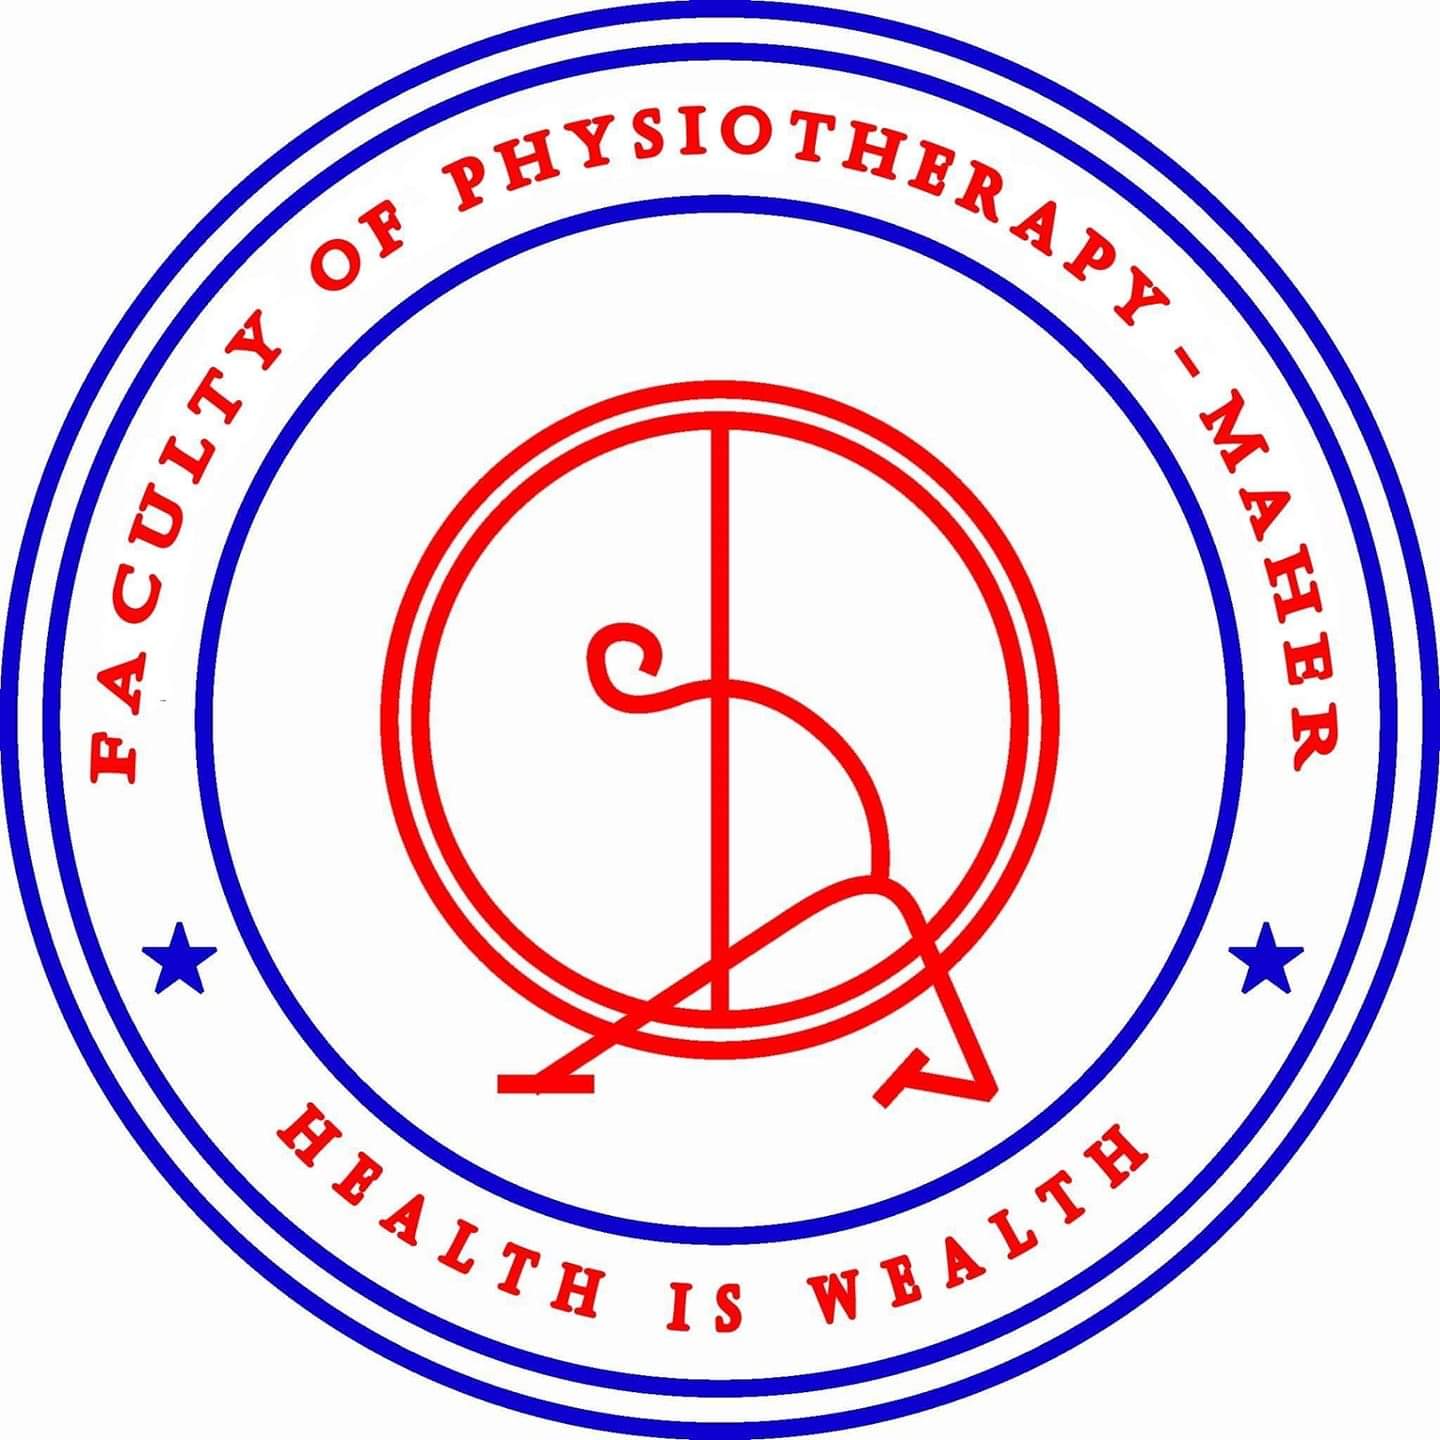 MEENAKSHI COLLEGE OF PHYSIOTHERAPY